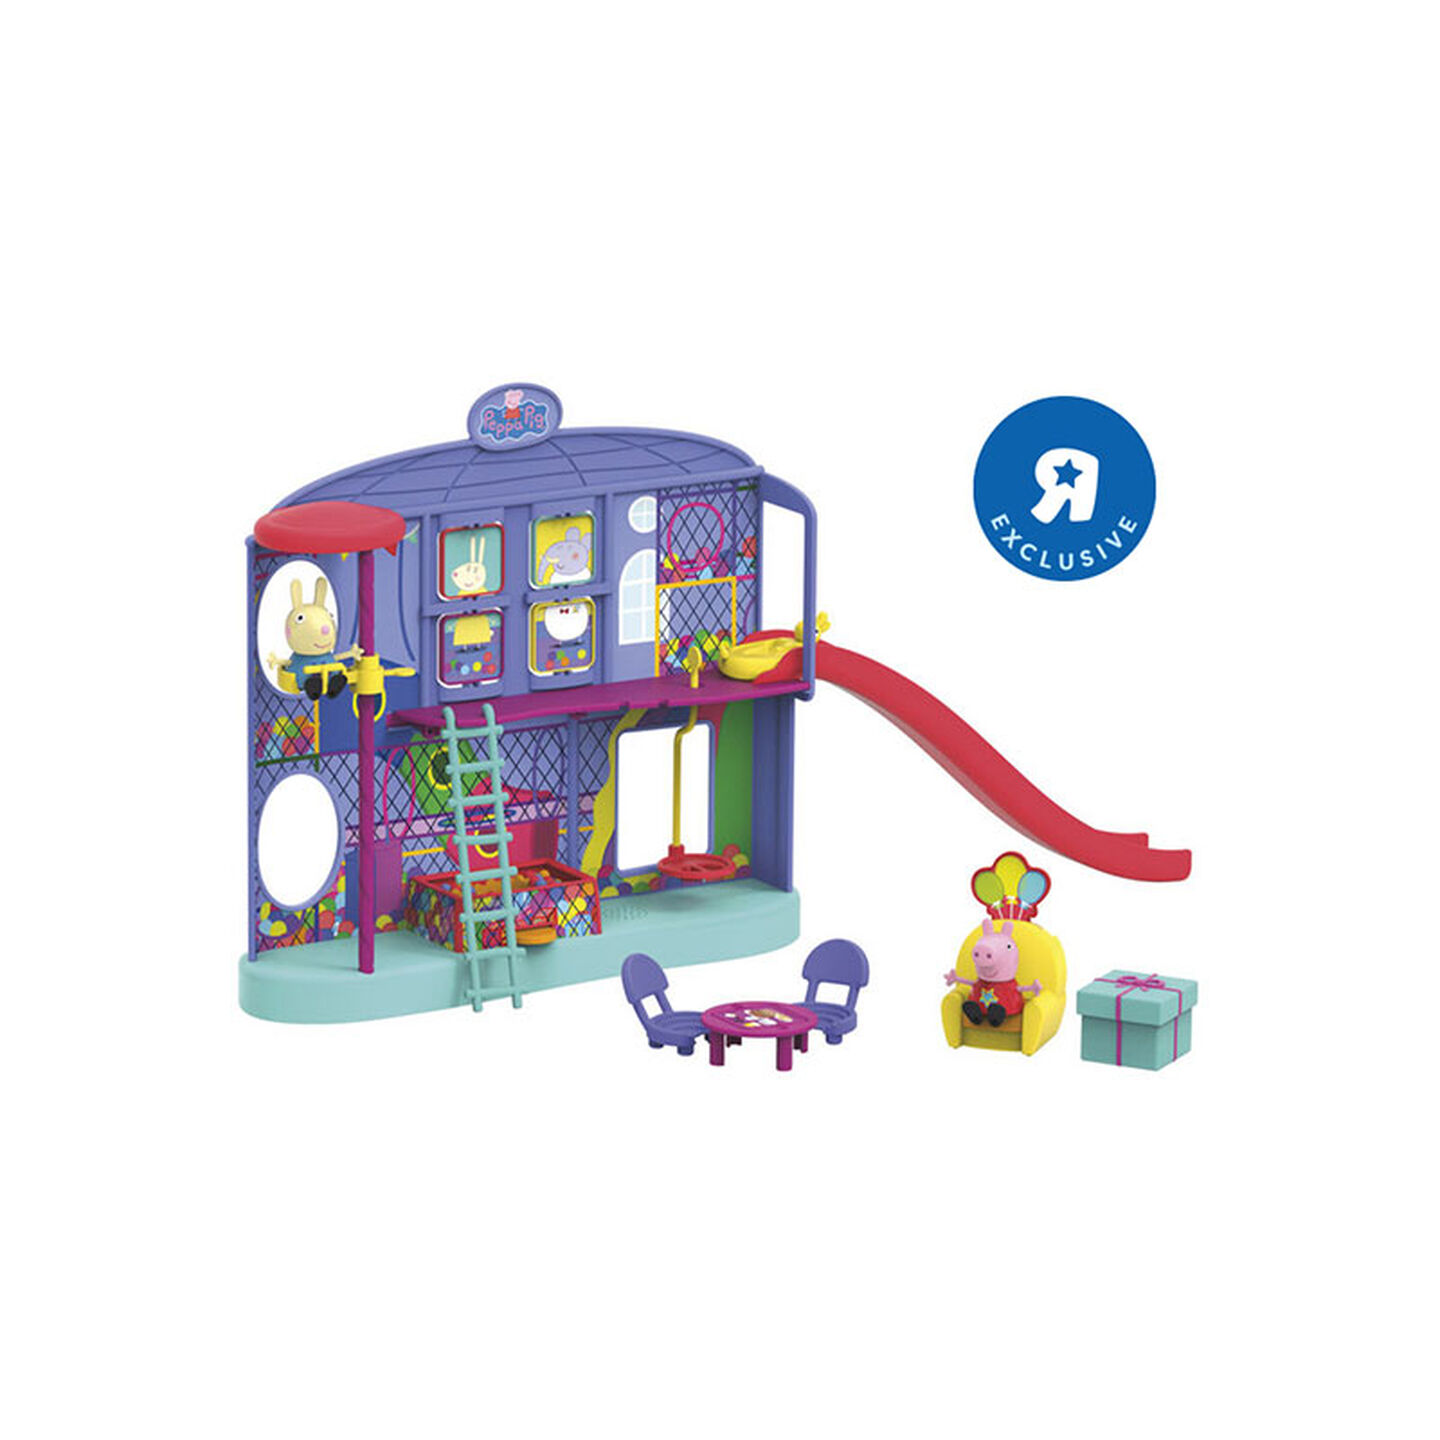 Peppa Pig Peppa's Adventures Peppa's Ultimate Play Center Preschool Toy, with Speech and Sounds